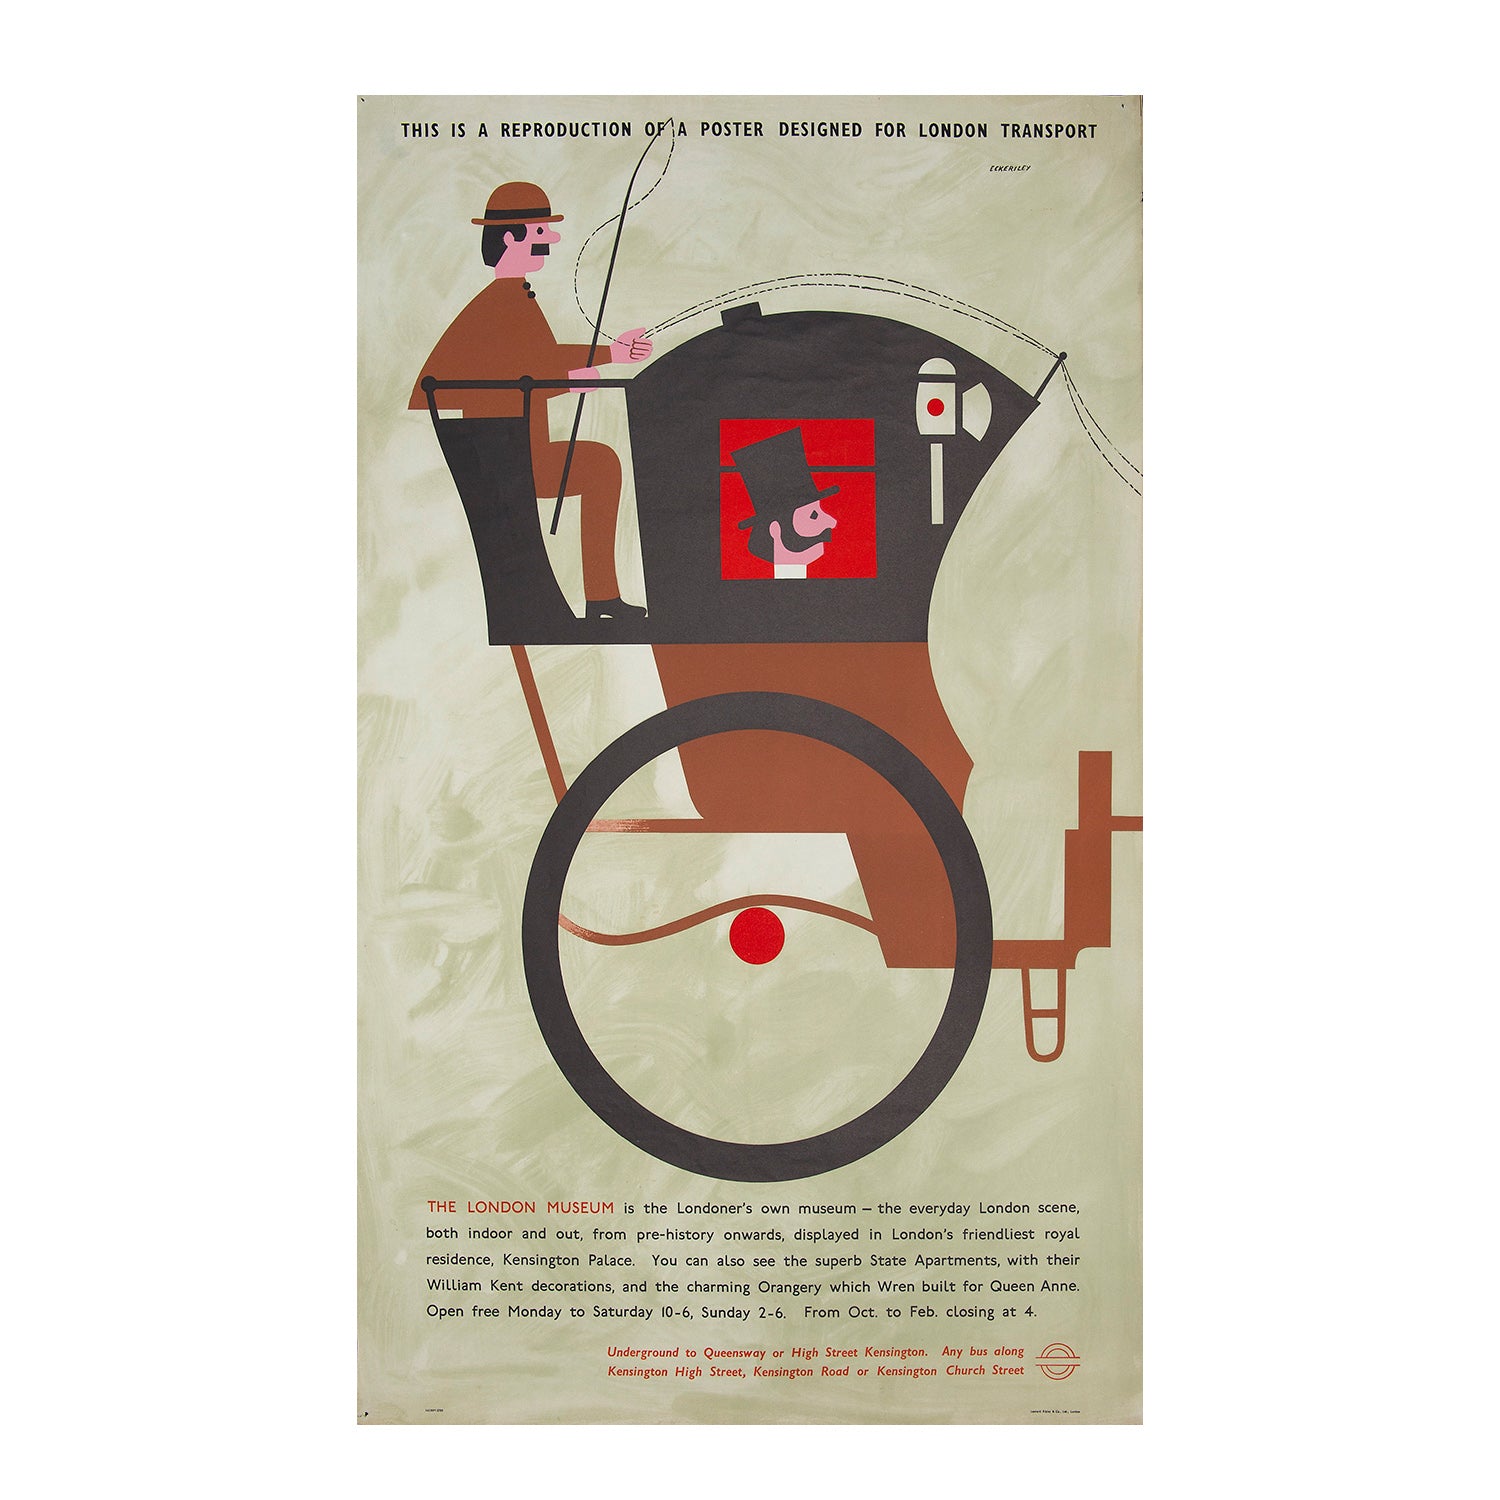 Original London Transport (LT) poster by noted British designer Tom Eckersley promoting the London Museum, featuring a nineteenth century Handsome Cab.